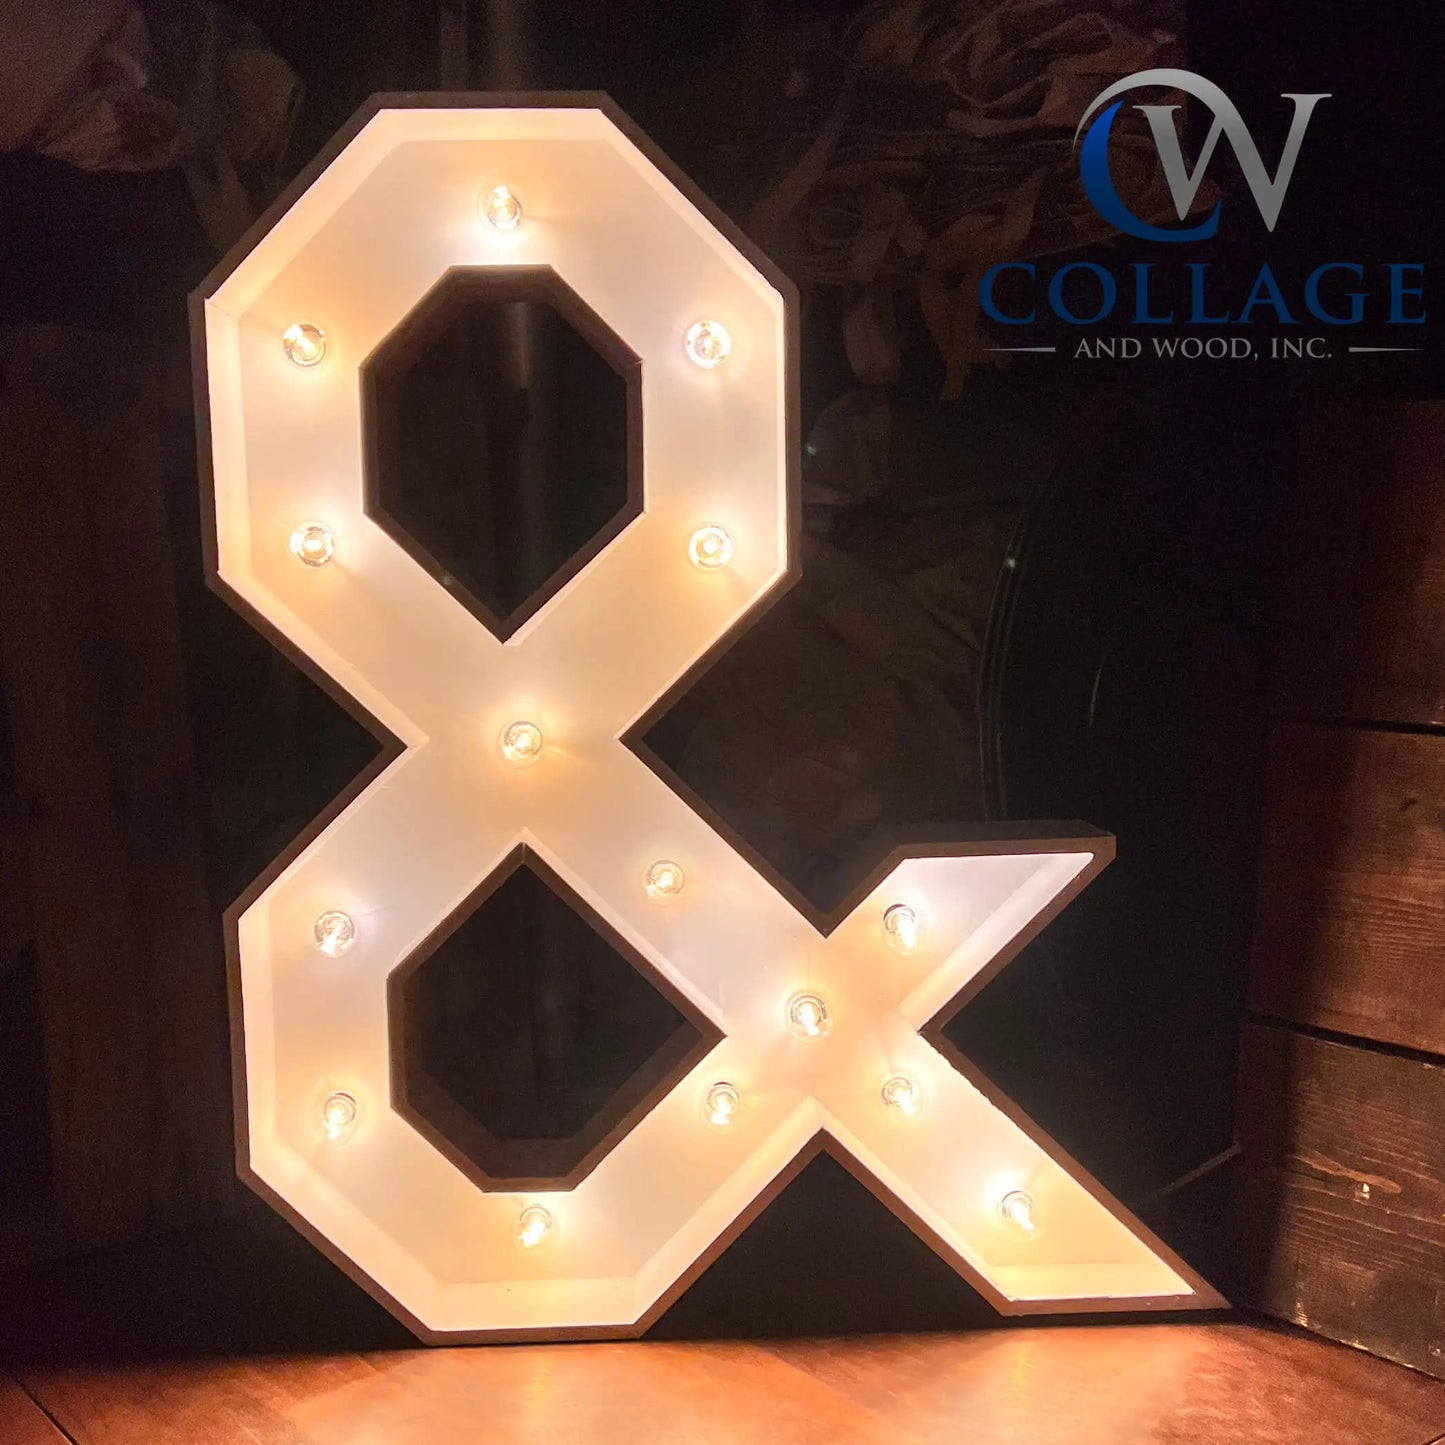 Amp up your event with this enchanting marquee light up ampersand, standing 3 feet tall. Crafted from premium wood and adorned with energy-efficient LED lights, it's the perfect addition to any celebration.